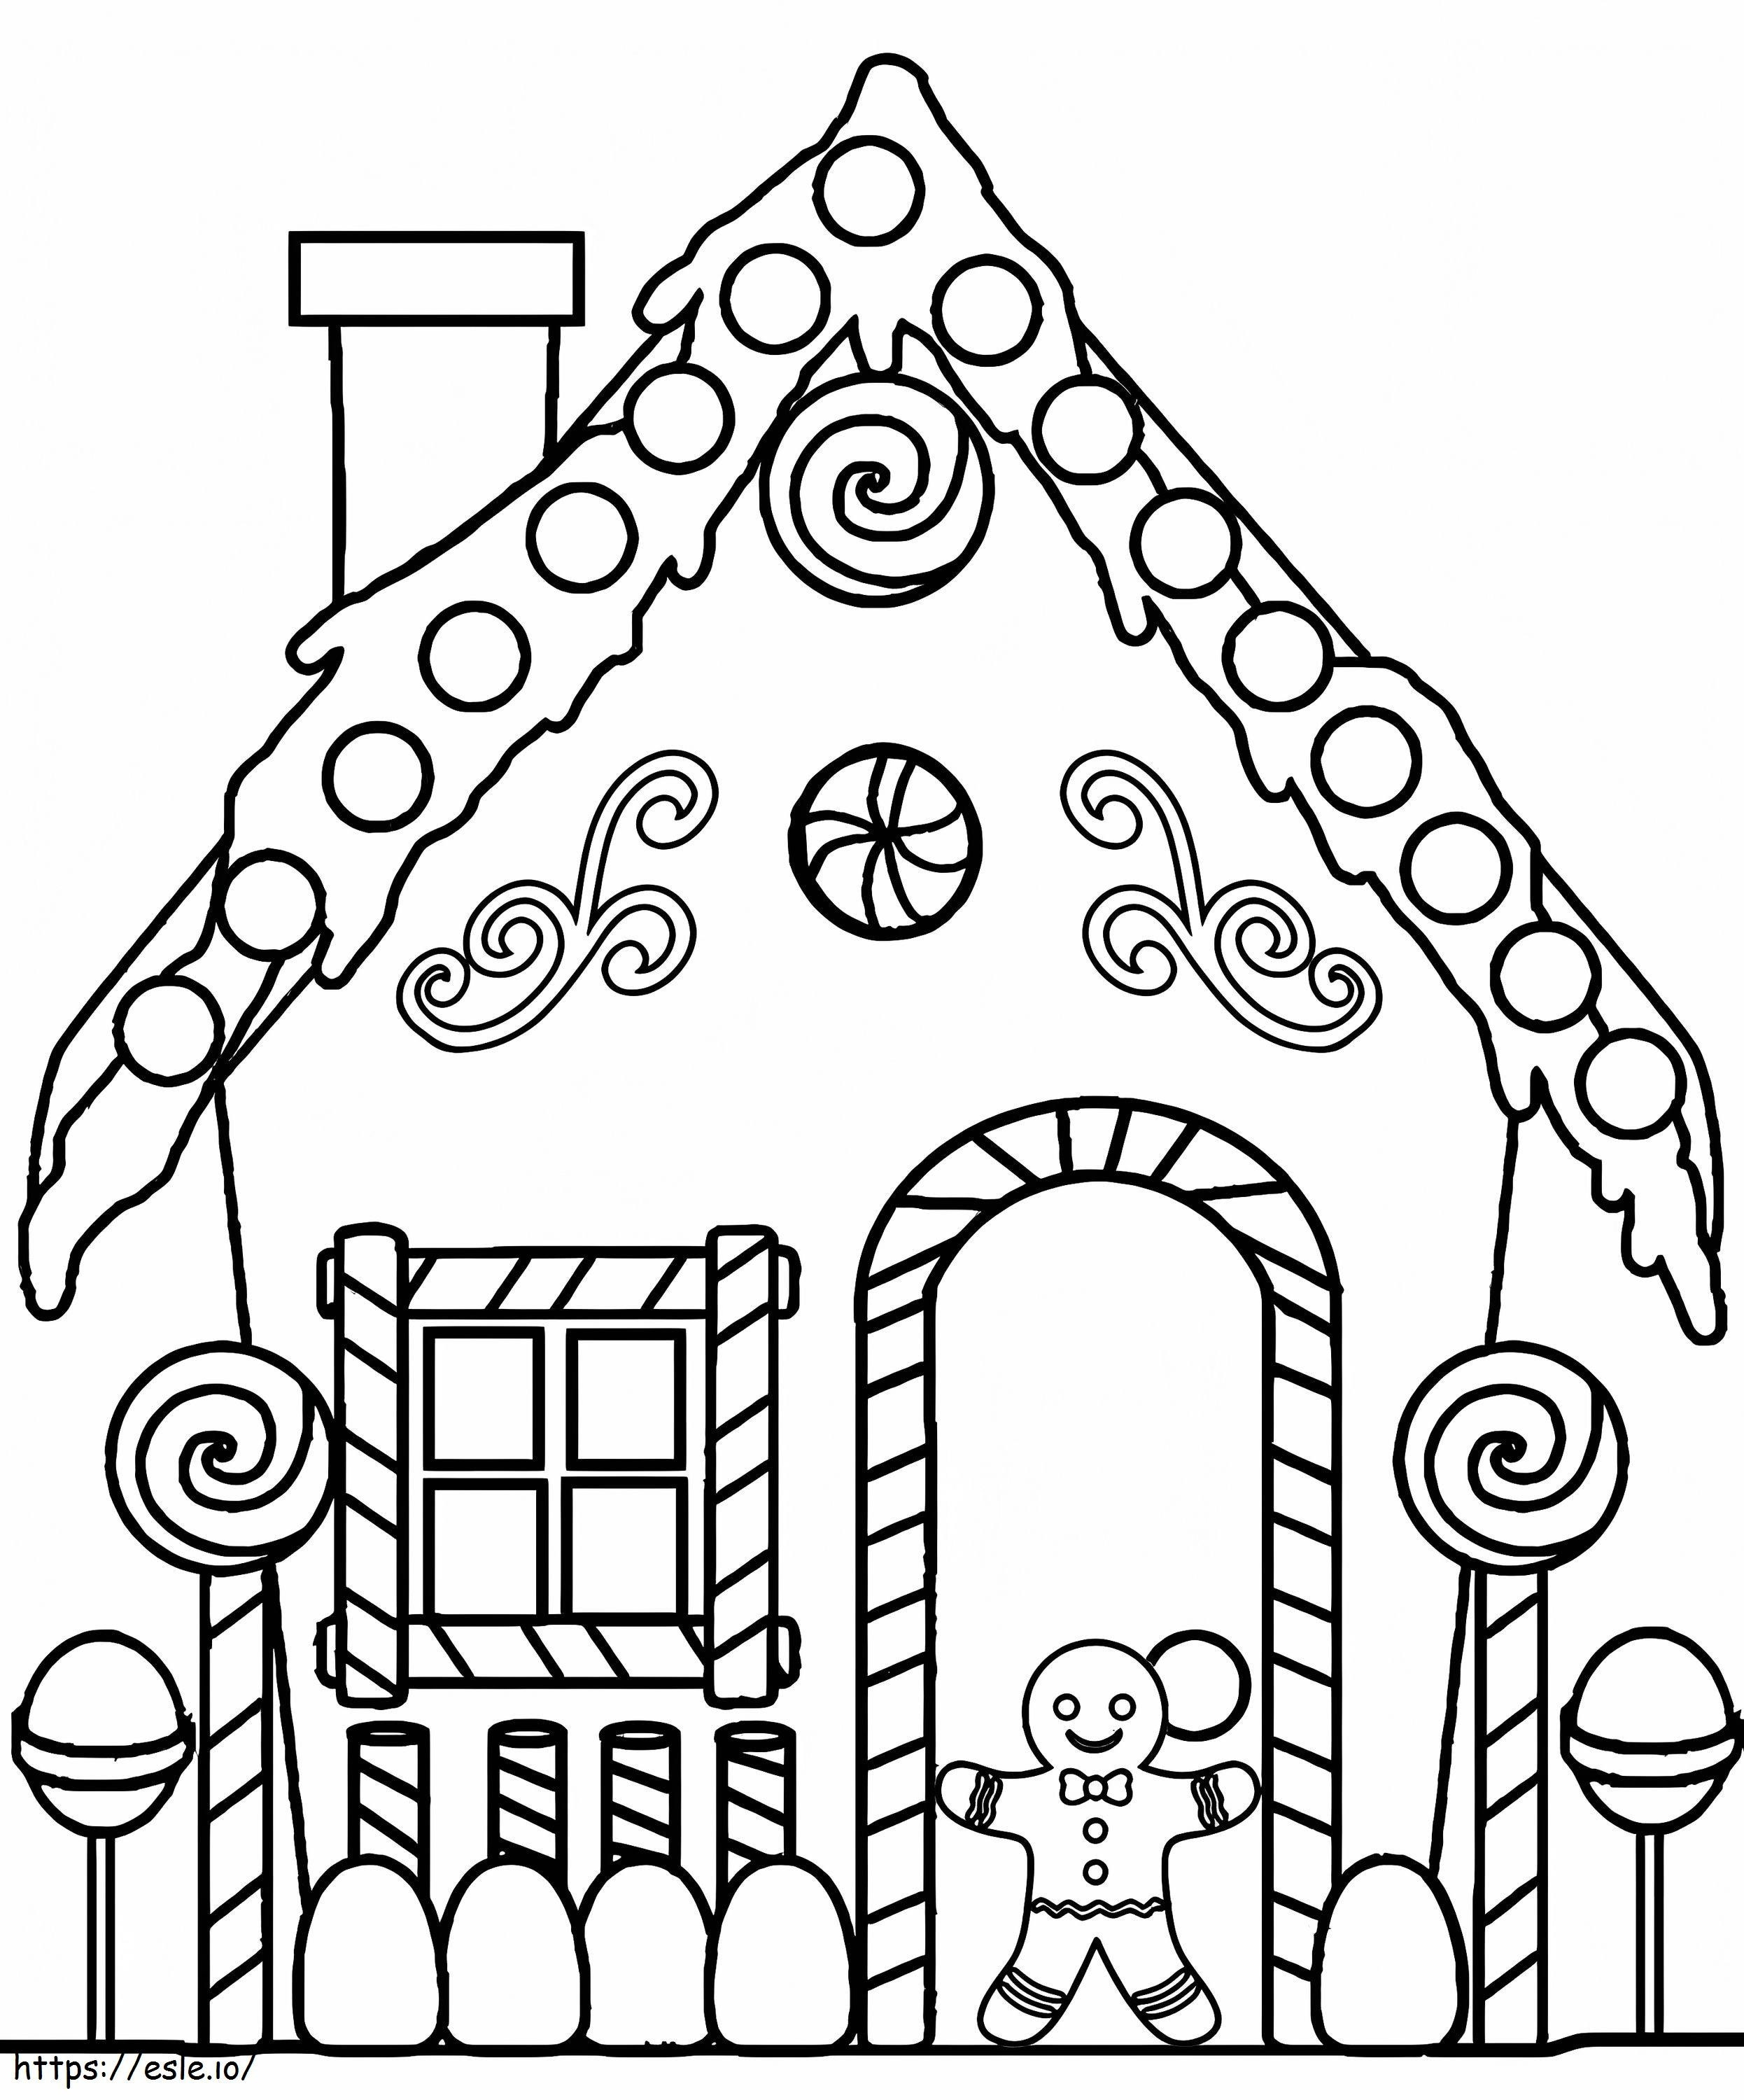 Easy Gingerbread House coloring page